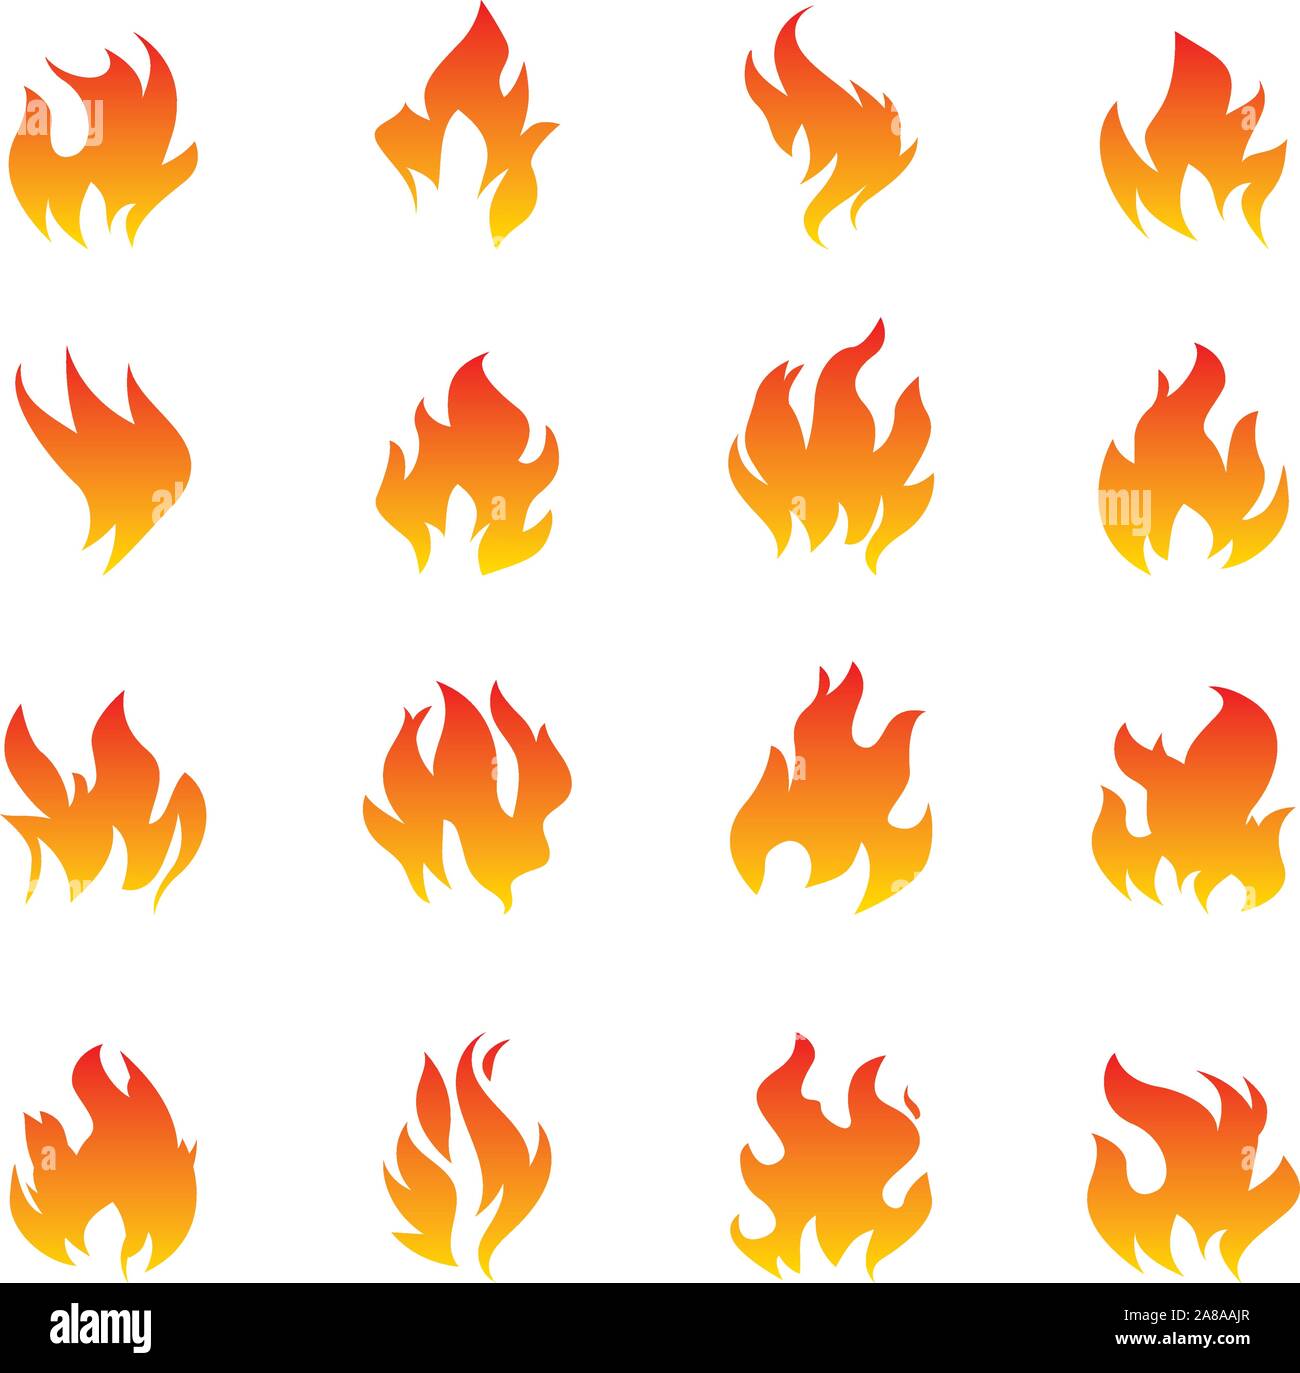 Big Collection of Fire and Flame icons on white background. Vector Illustration and graphic outline elements. Stock Vector